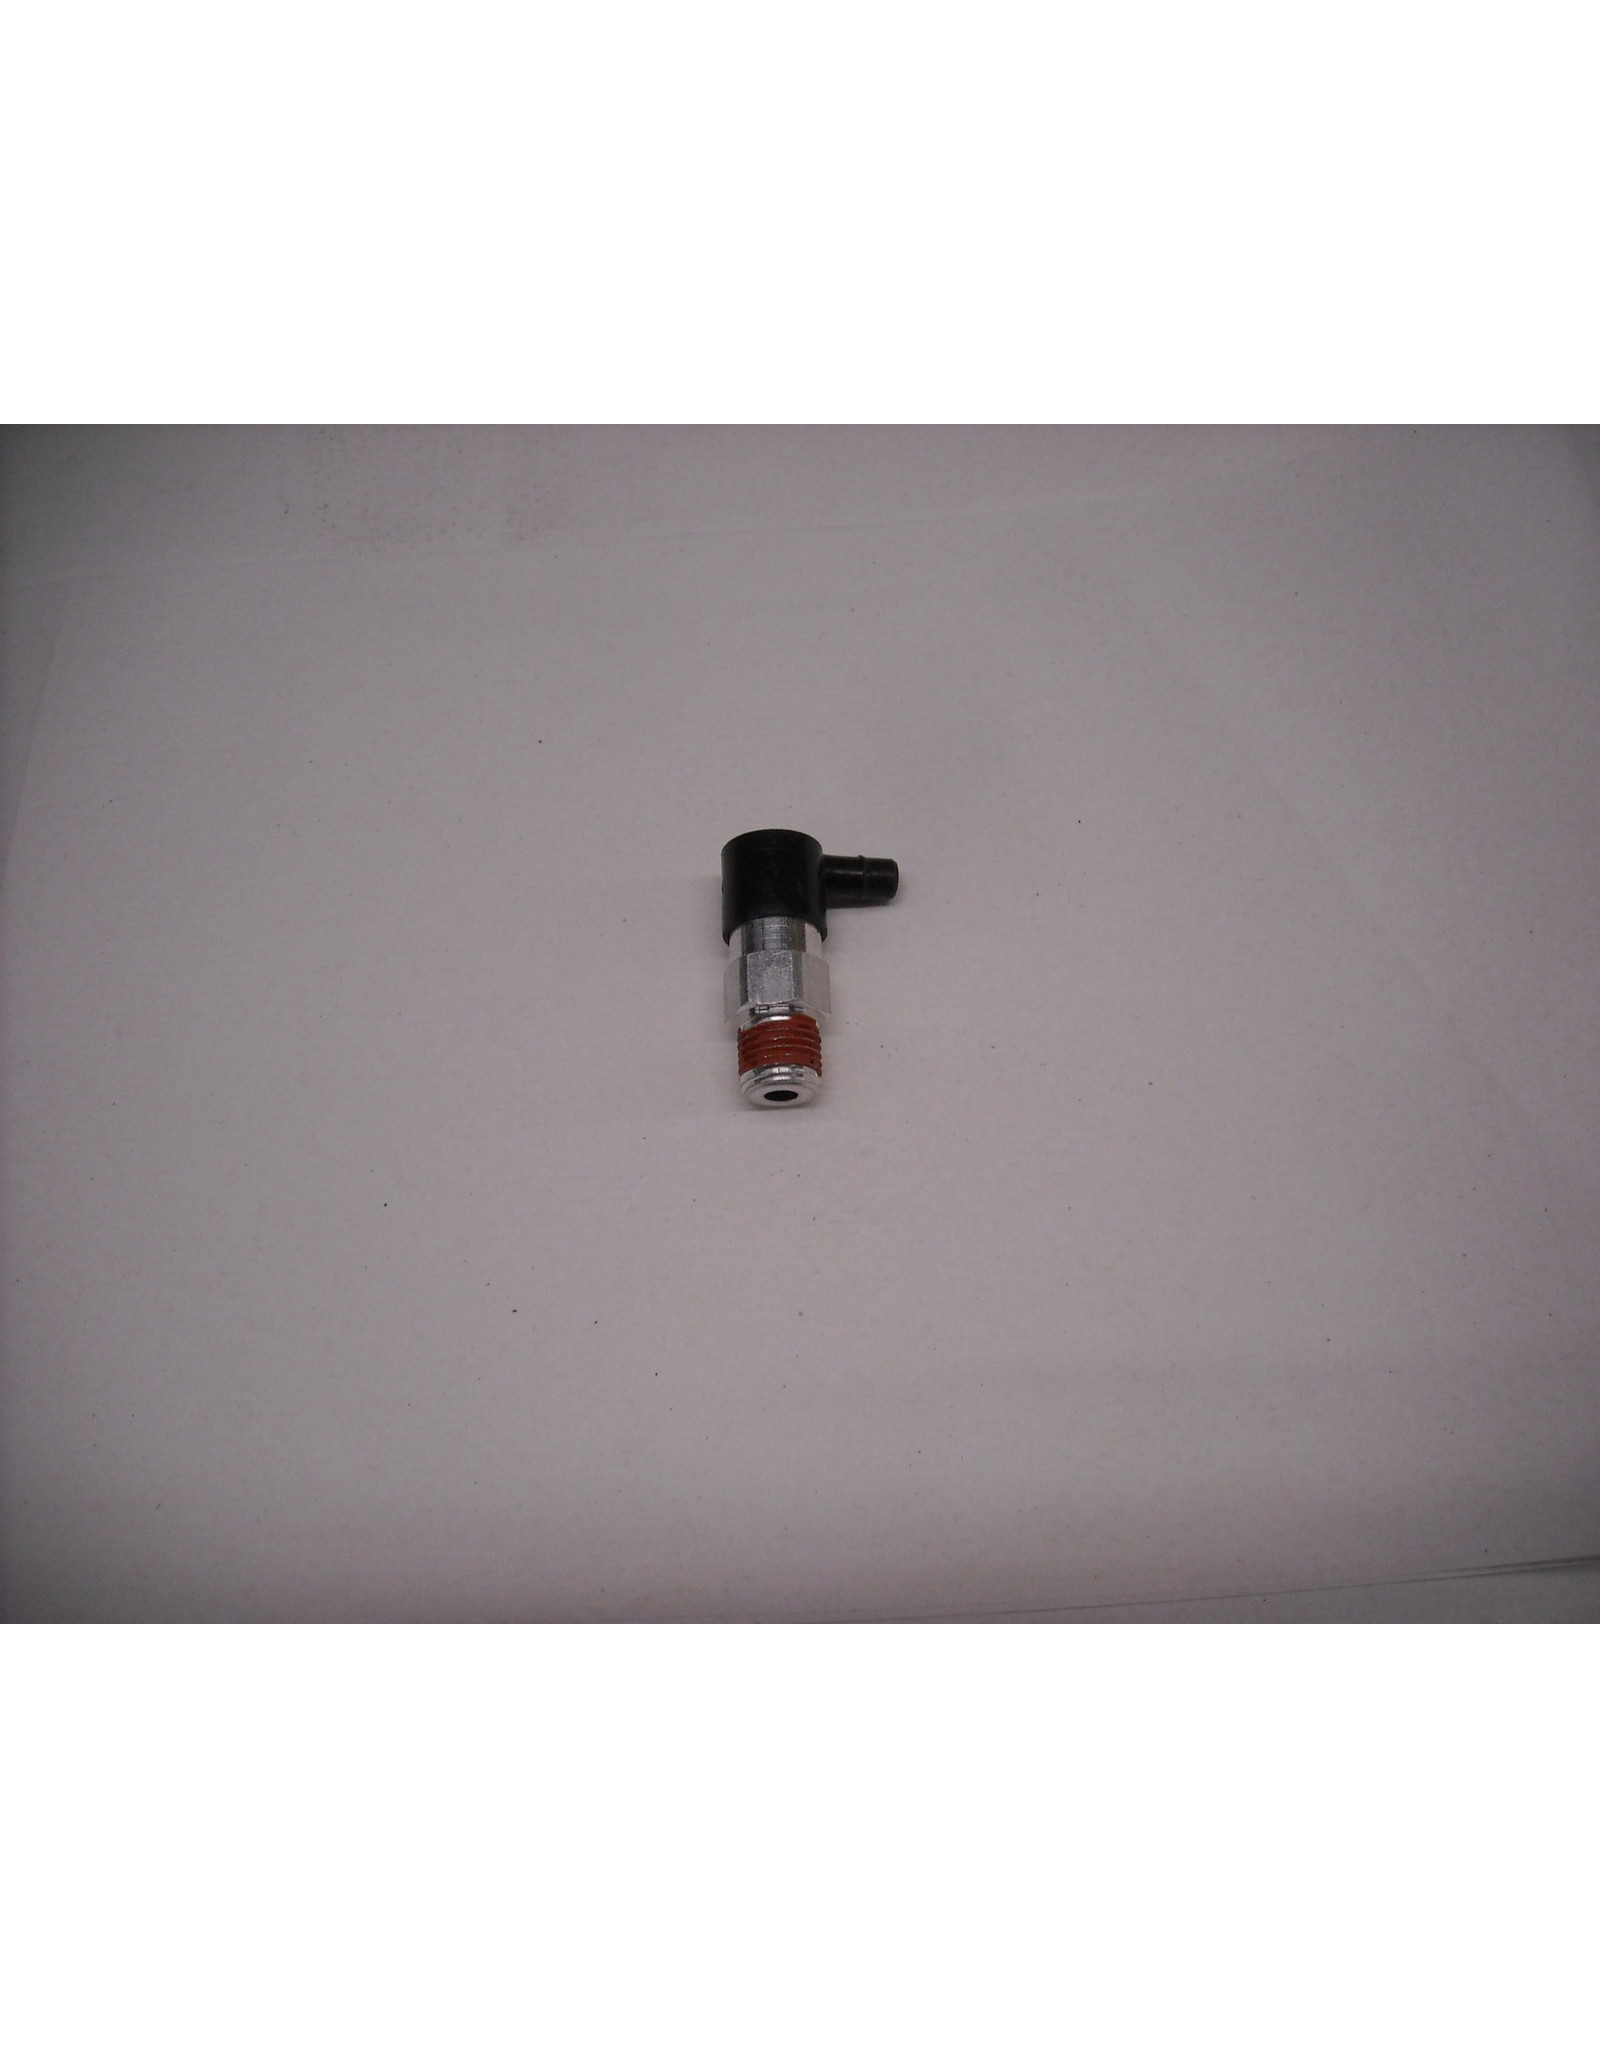 BE 85.300.022 Thermal Valve 1/4"